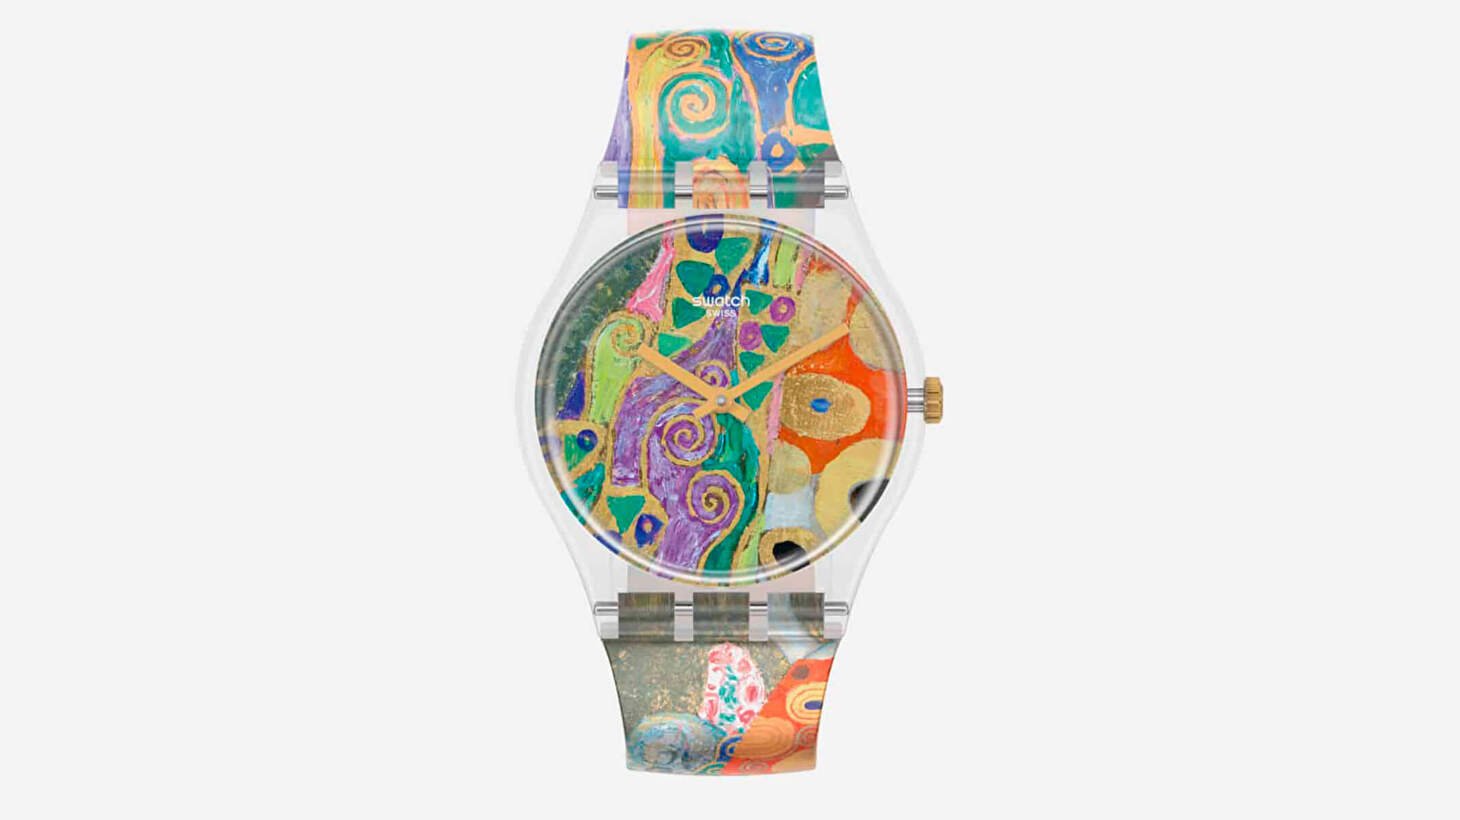 Swatch | MoMA 